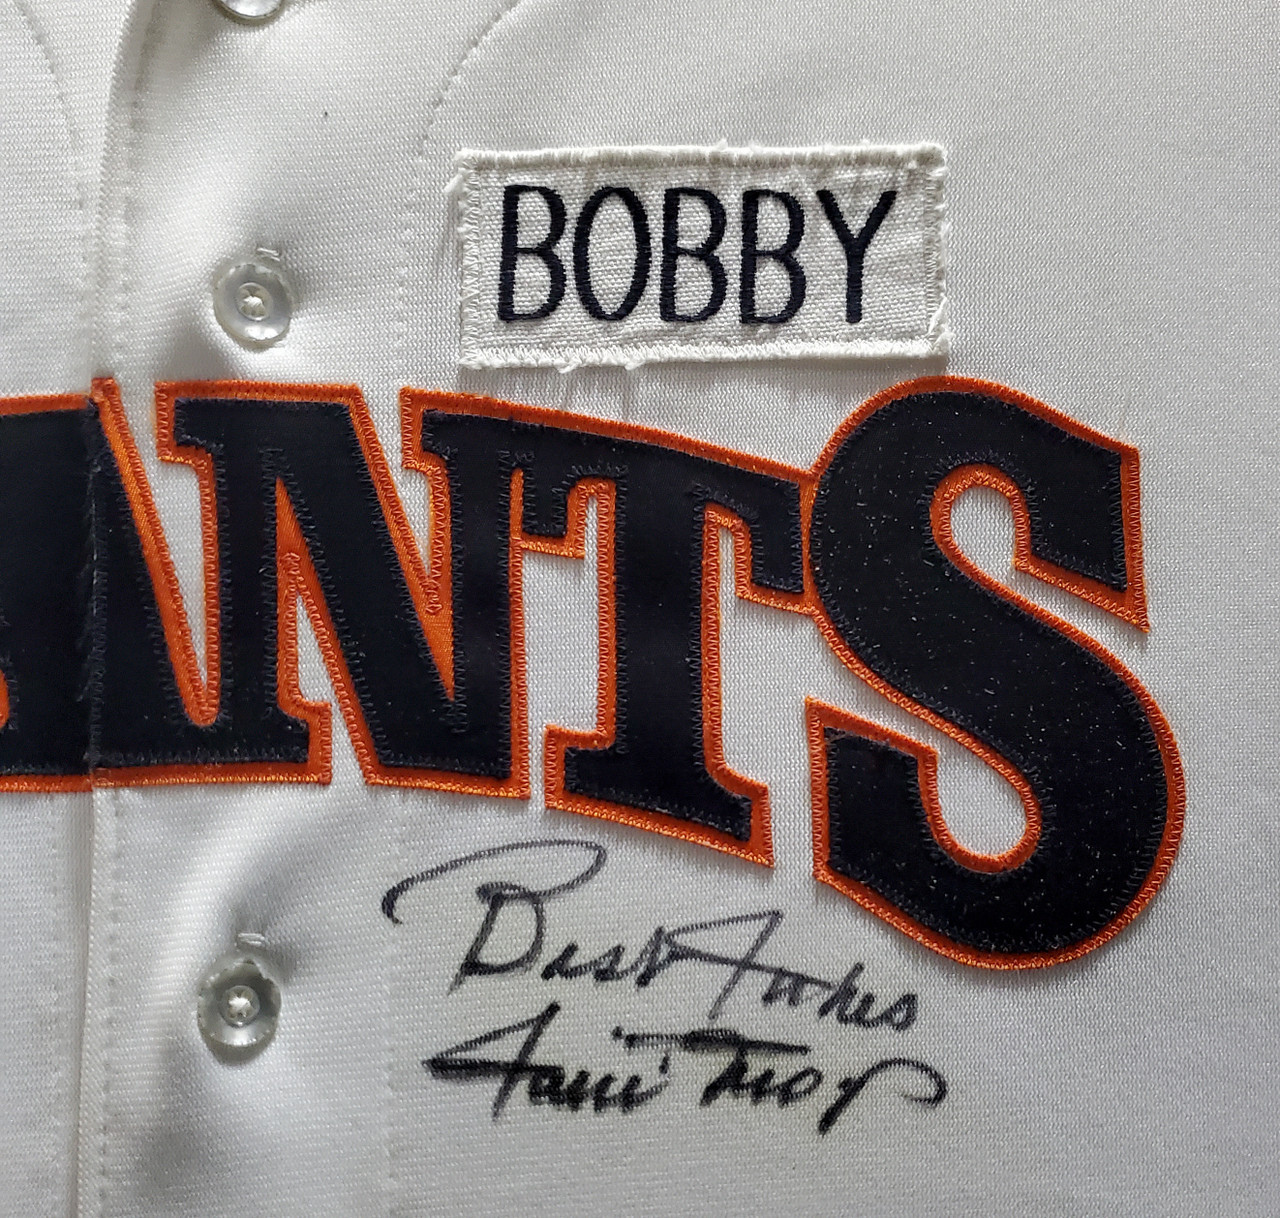 Willie Mays Signed Jersey with Stats Say Hey Authenticated – All